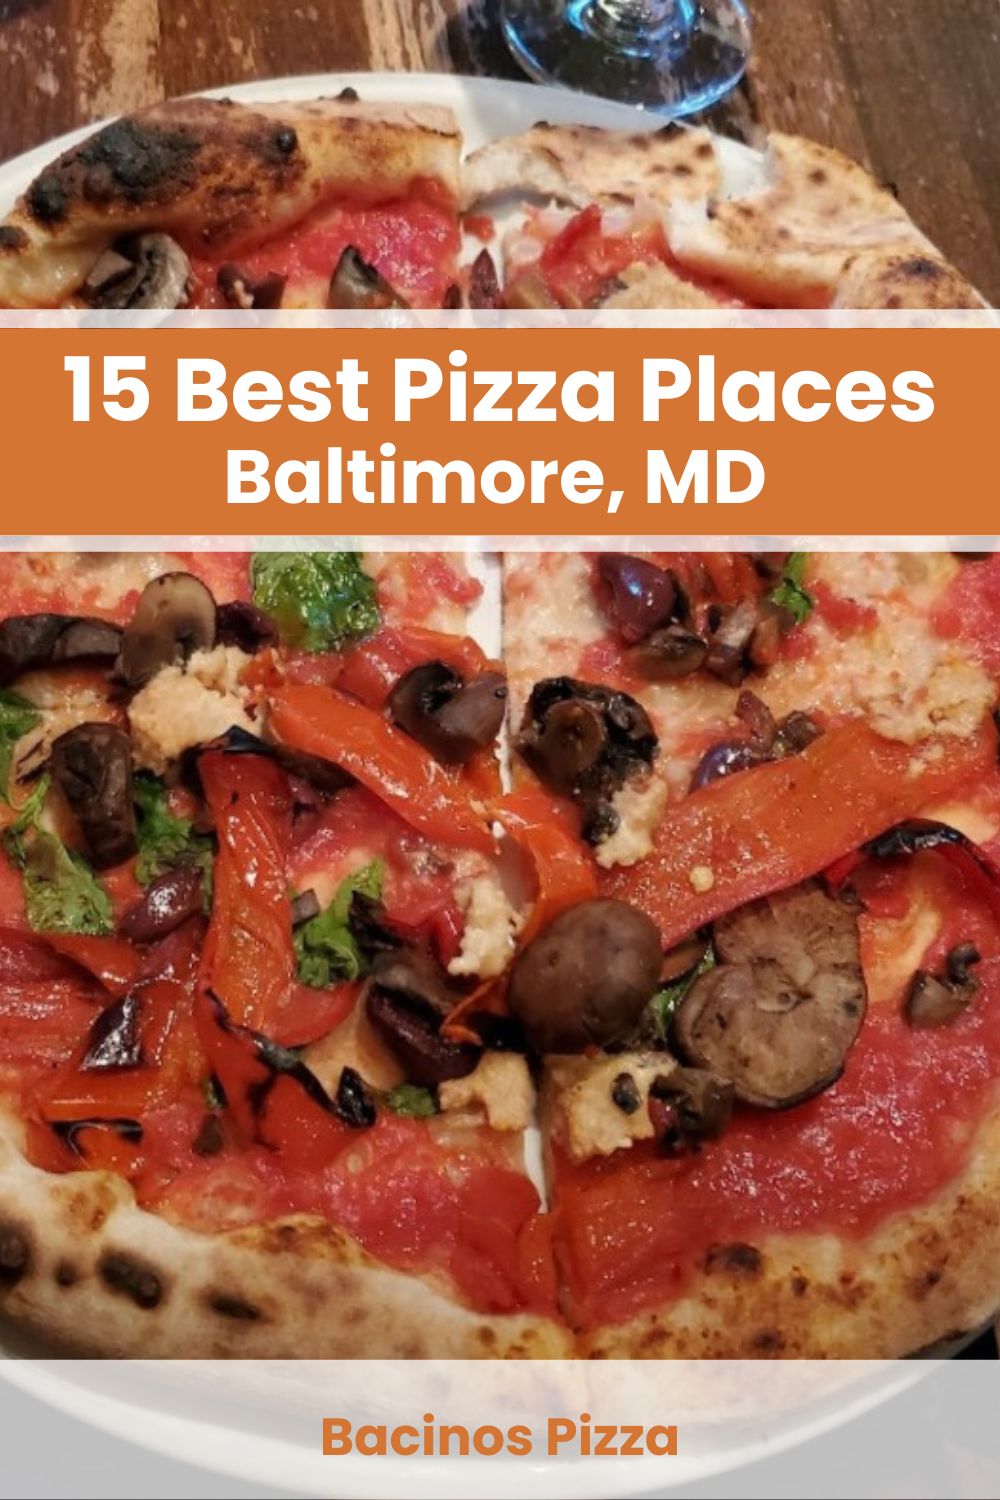 Best Pizza Places in Baltimore